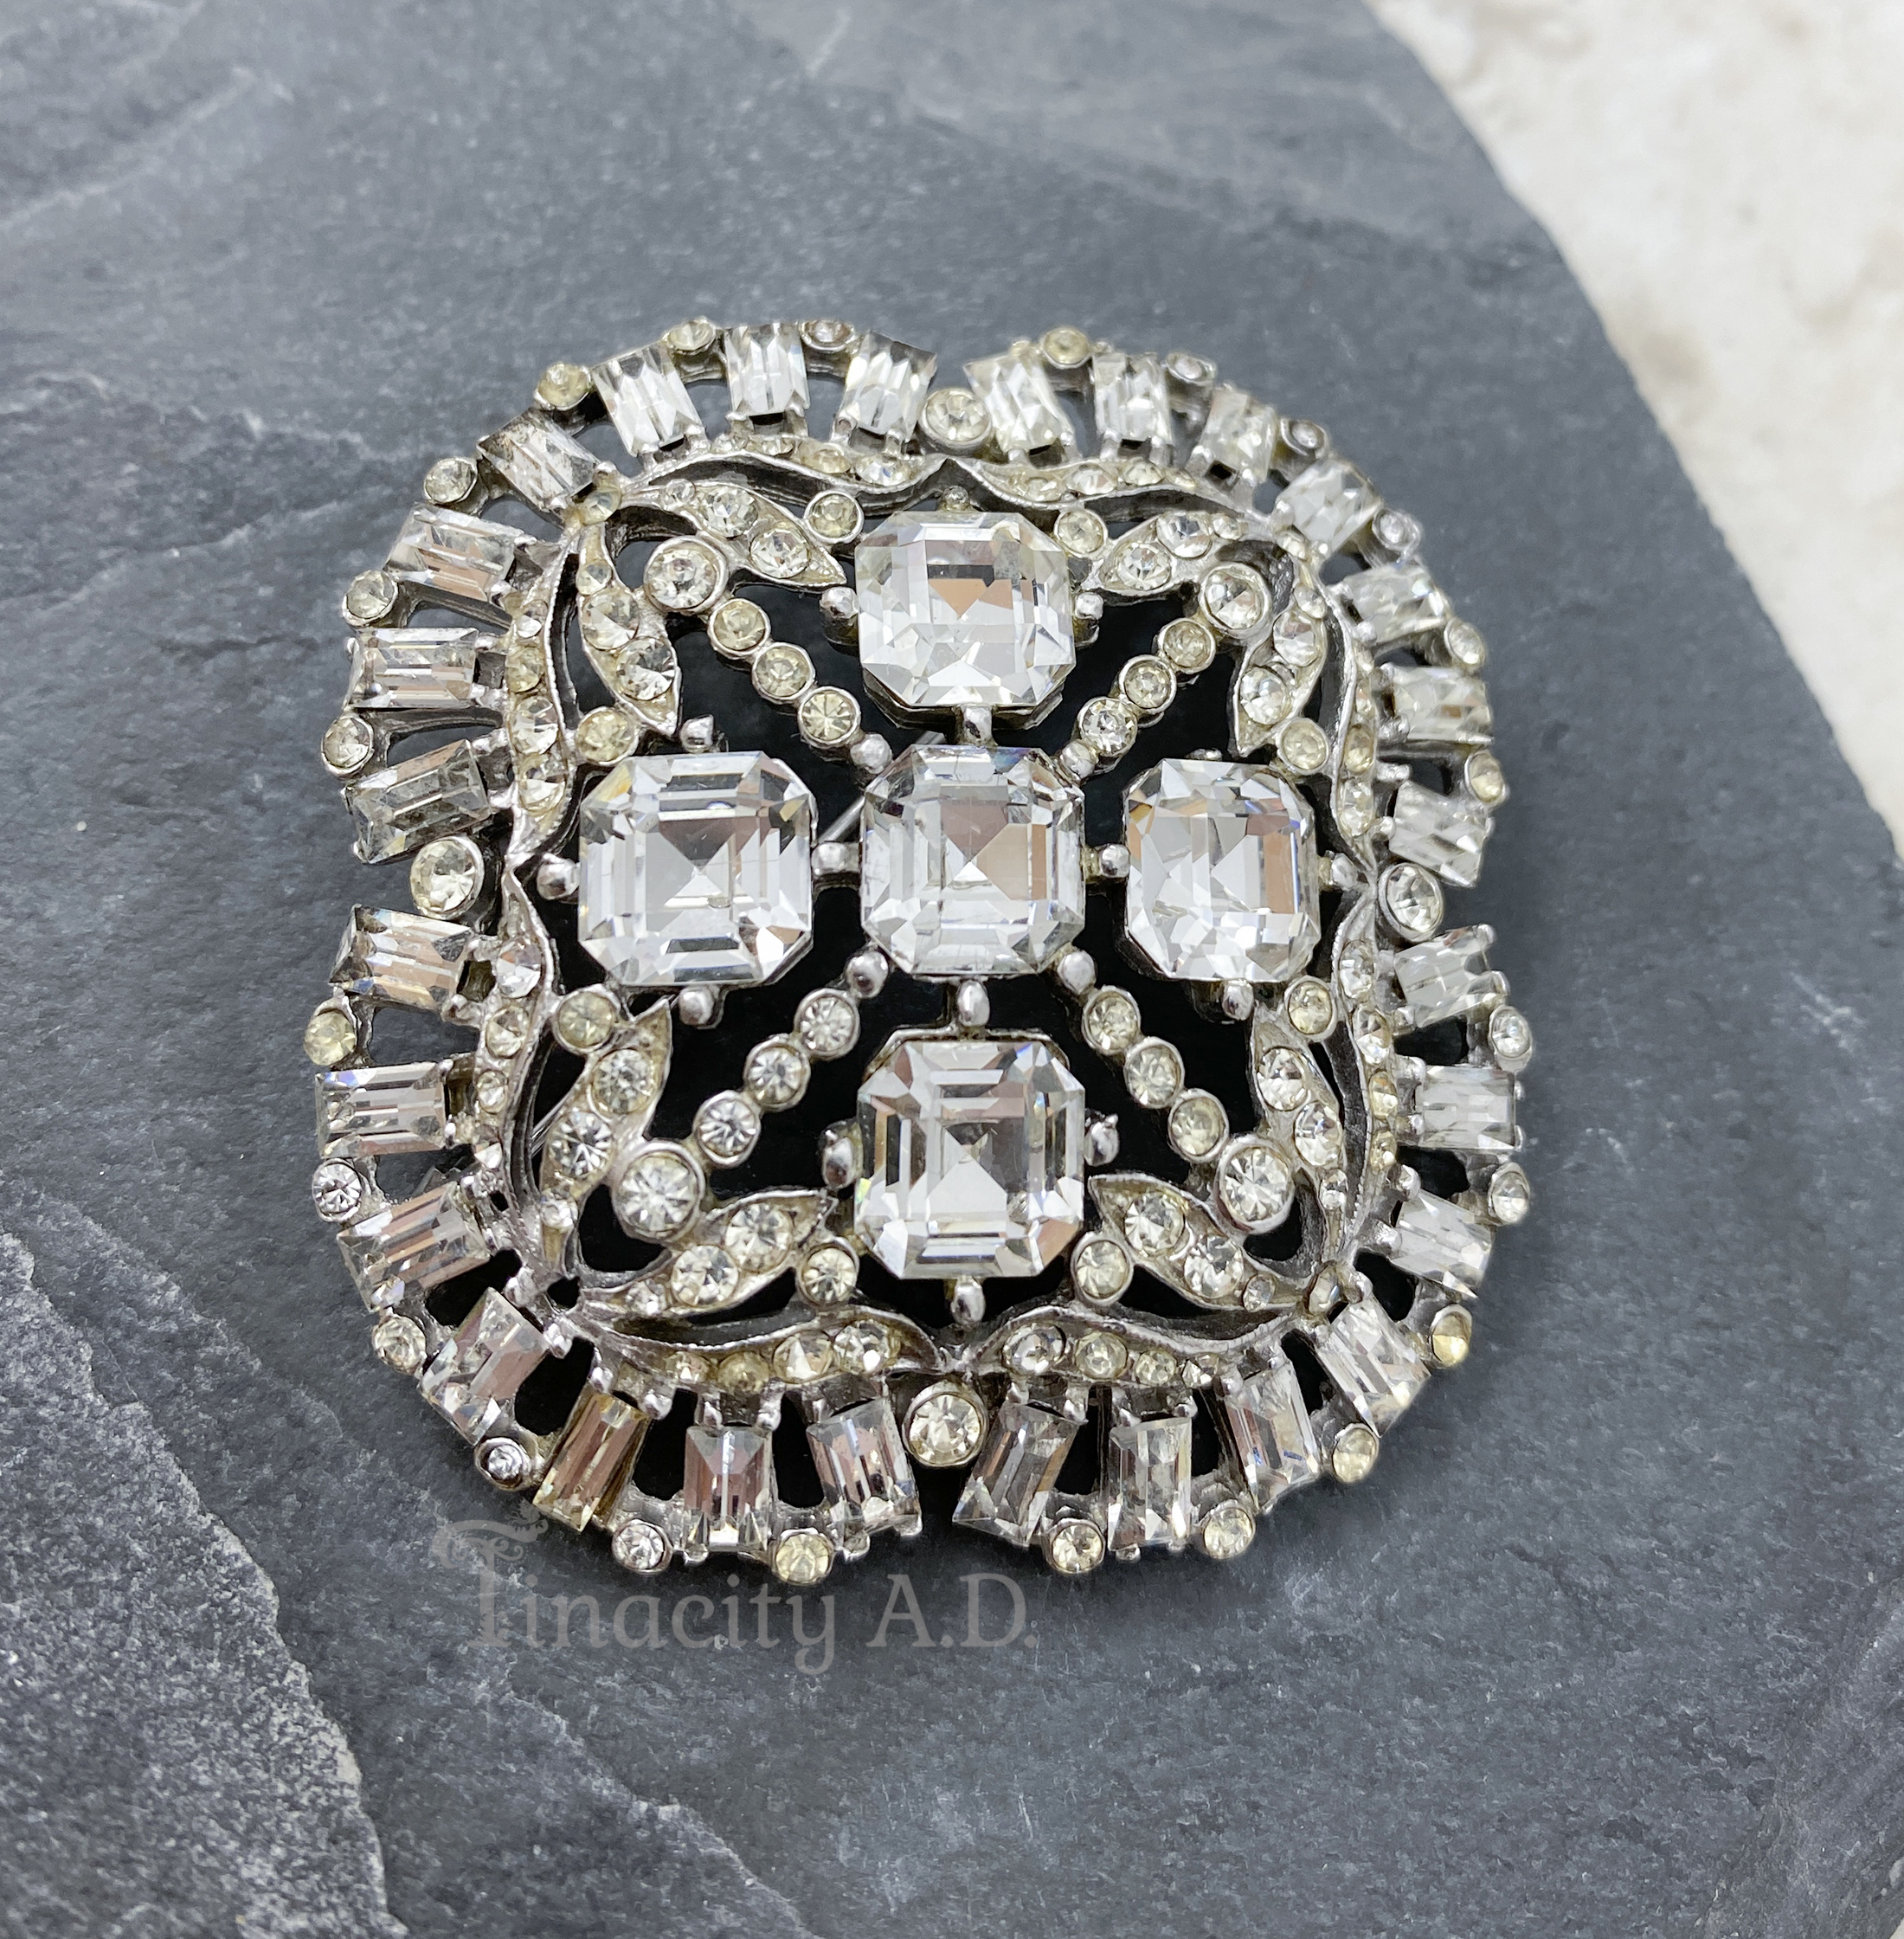 A GORGEOUS Vintage Brooch, Art Deco Design Dating to the 1940's